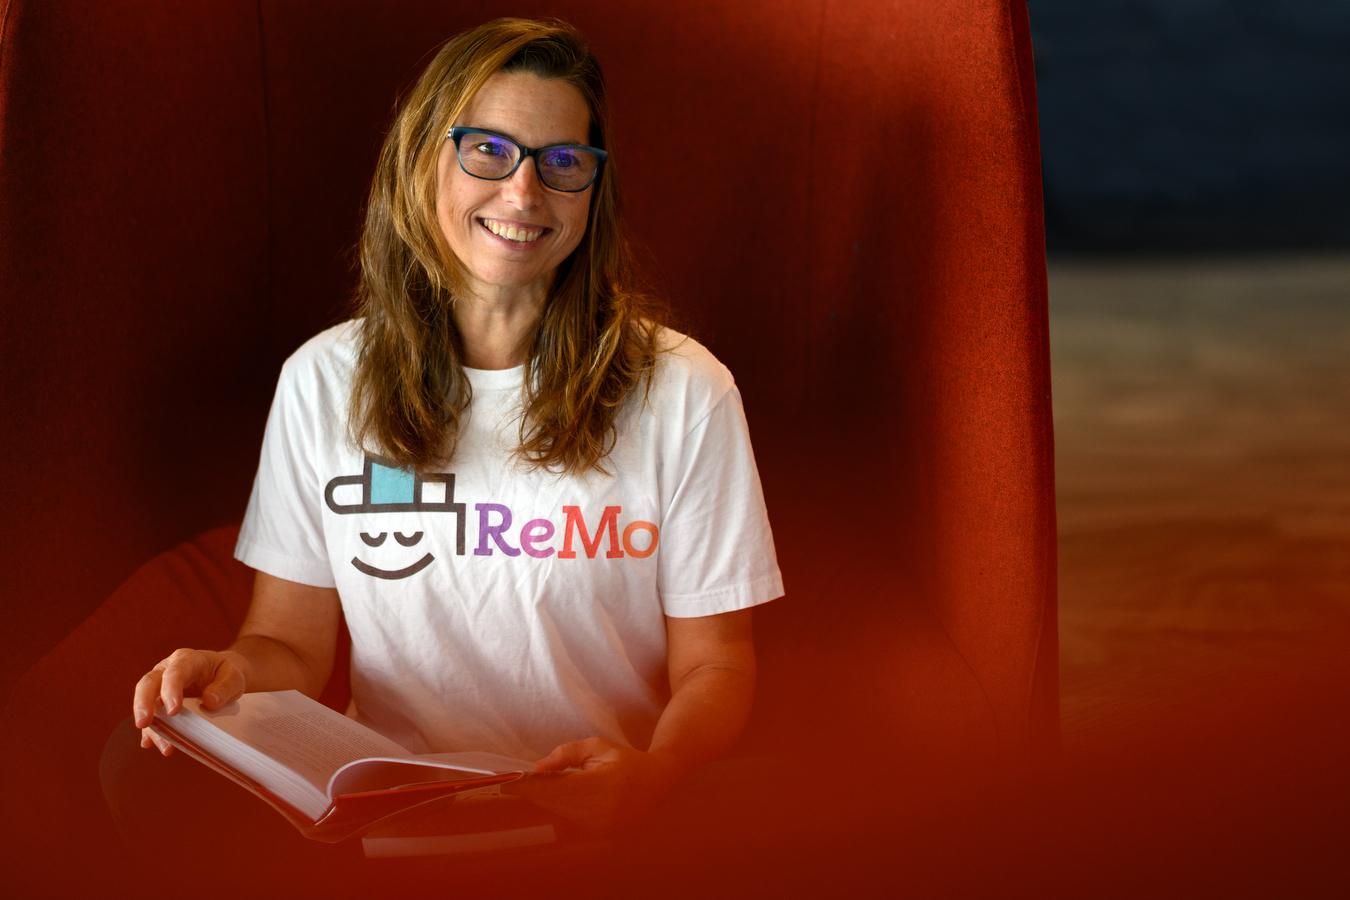 michelle deblois smiling wearing shirt with ReMo logo on it